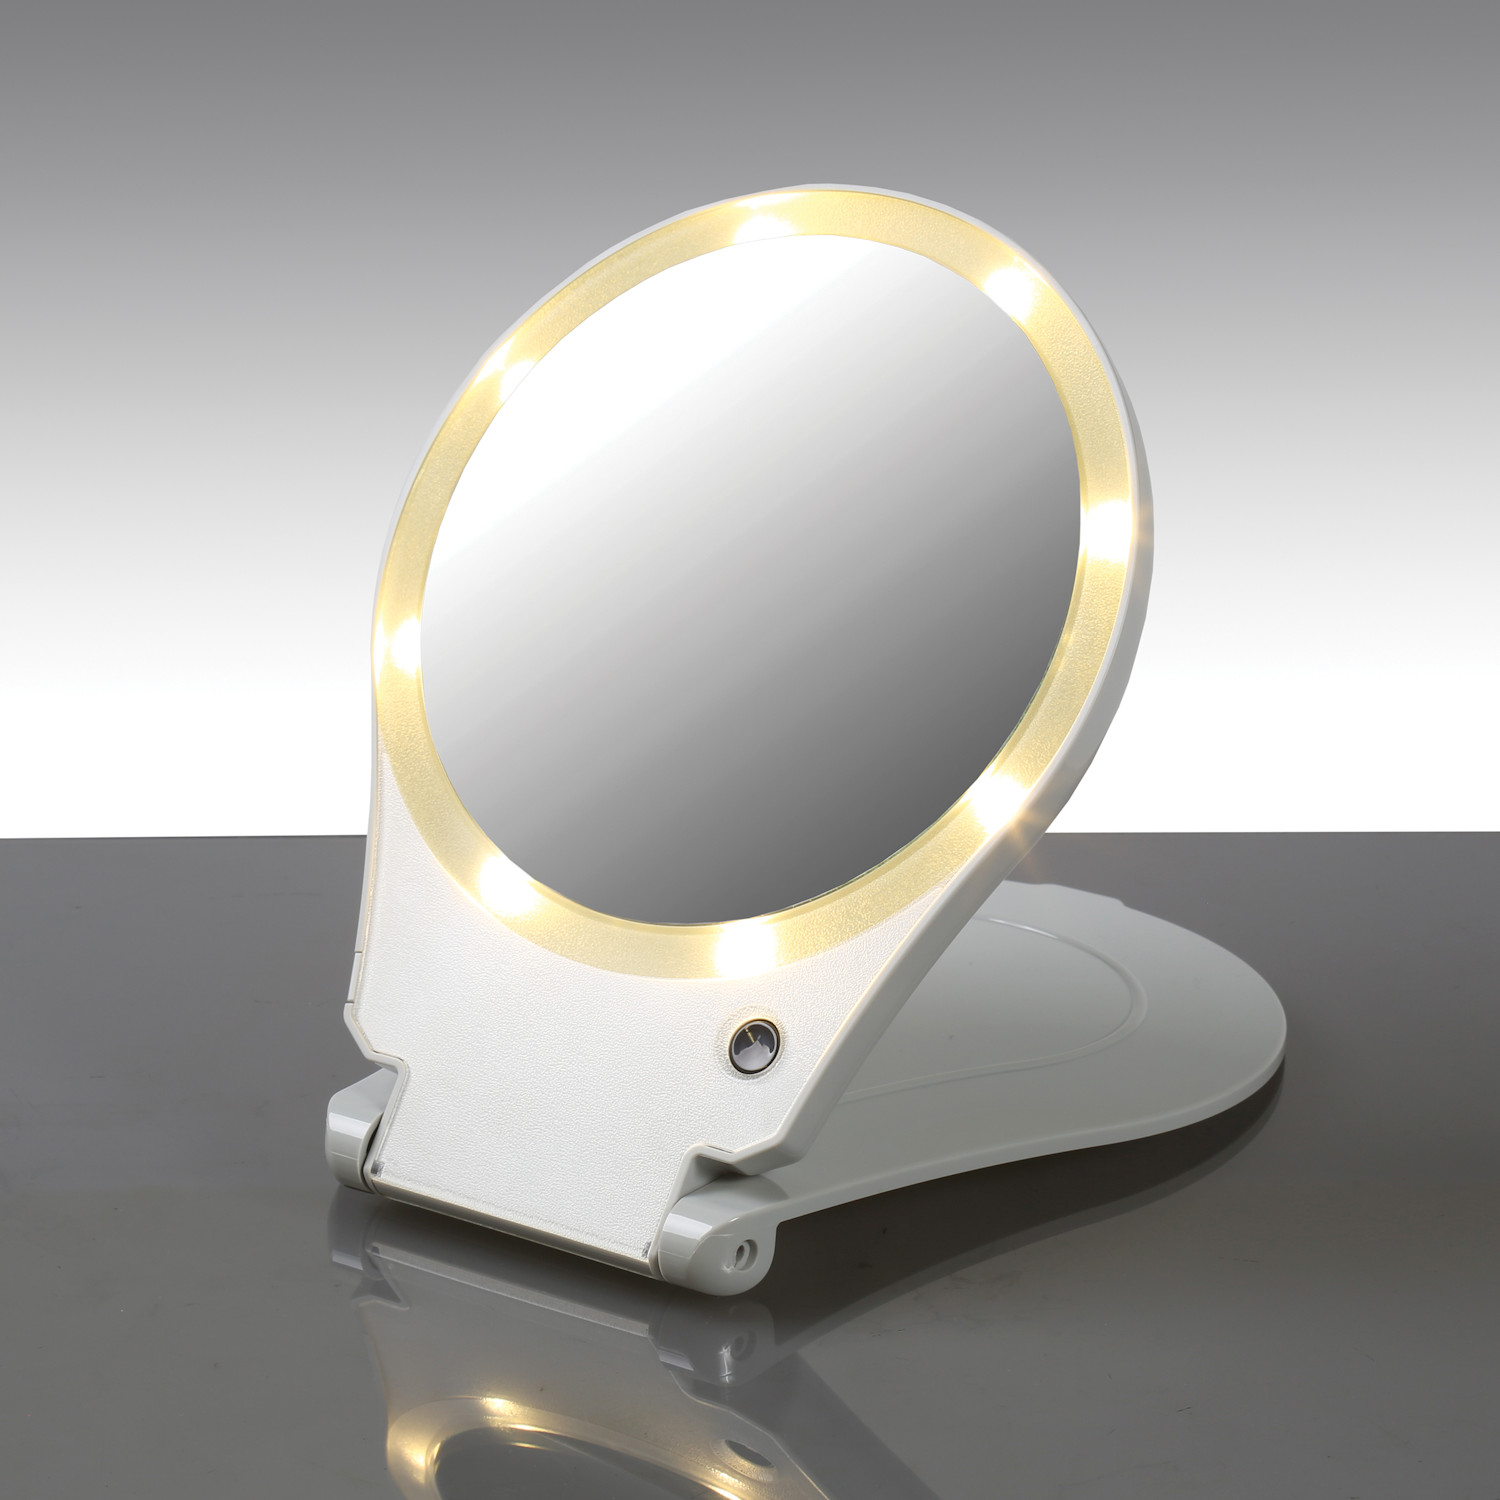 Floxite 10x Magnification Lighted, Floxite 10x Lighted Mirror